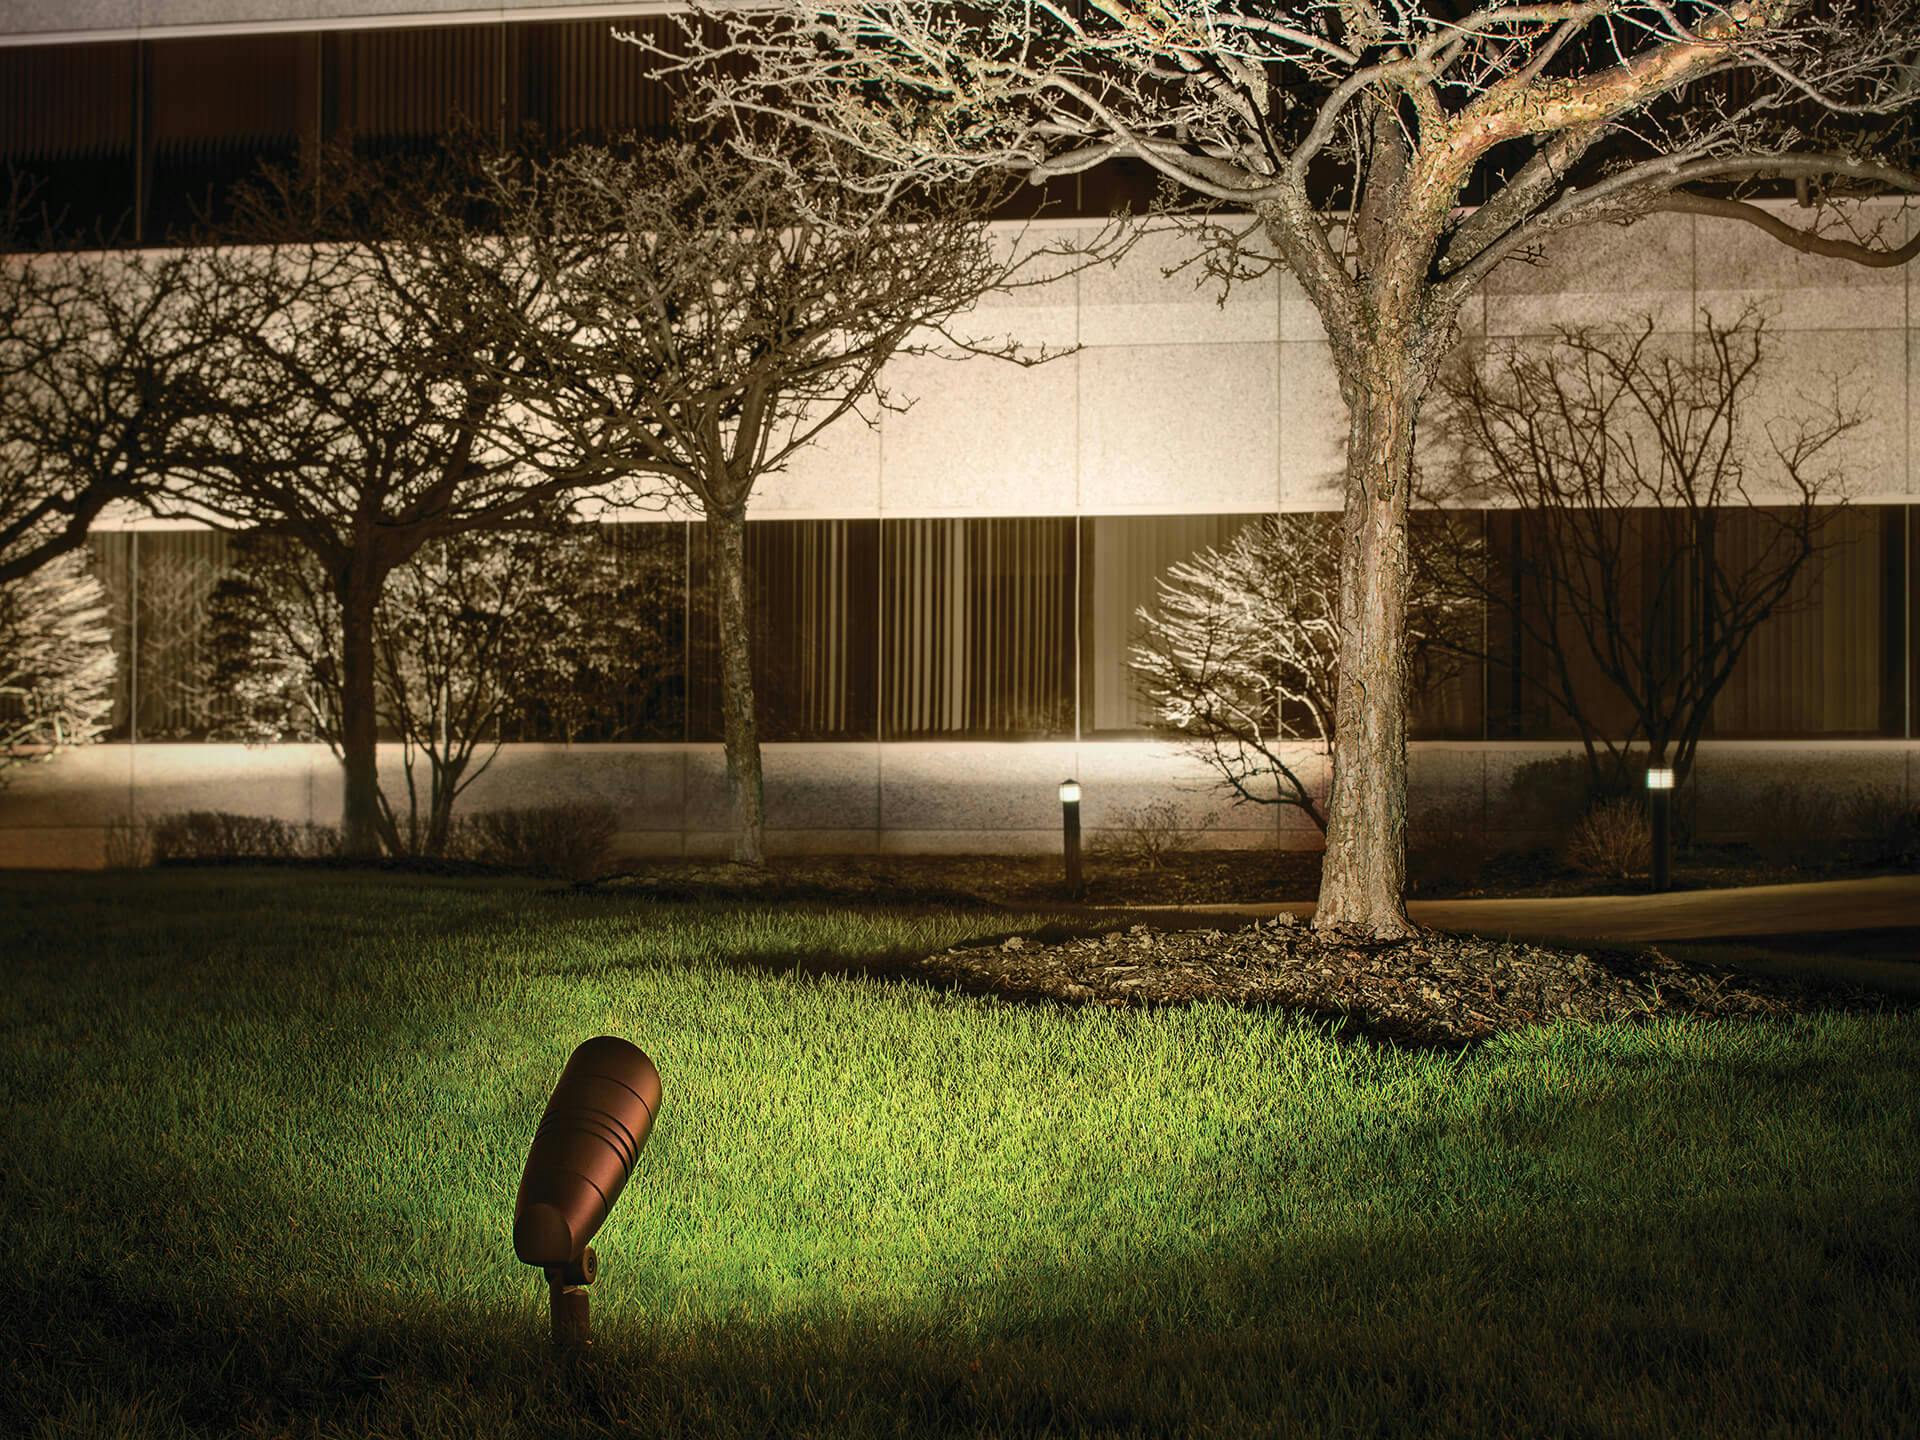 Exterior of an office building with flood lights providing uplighting on the trees and landscape